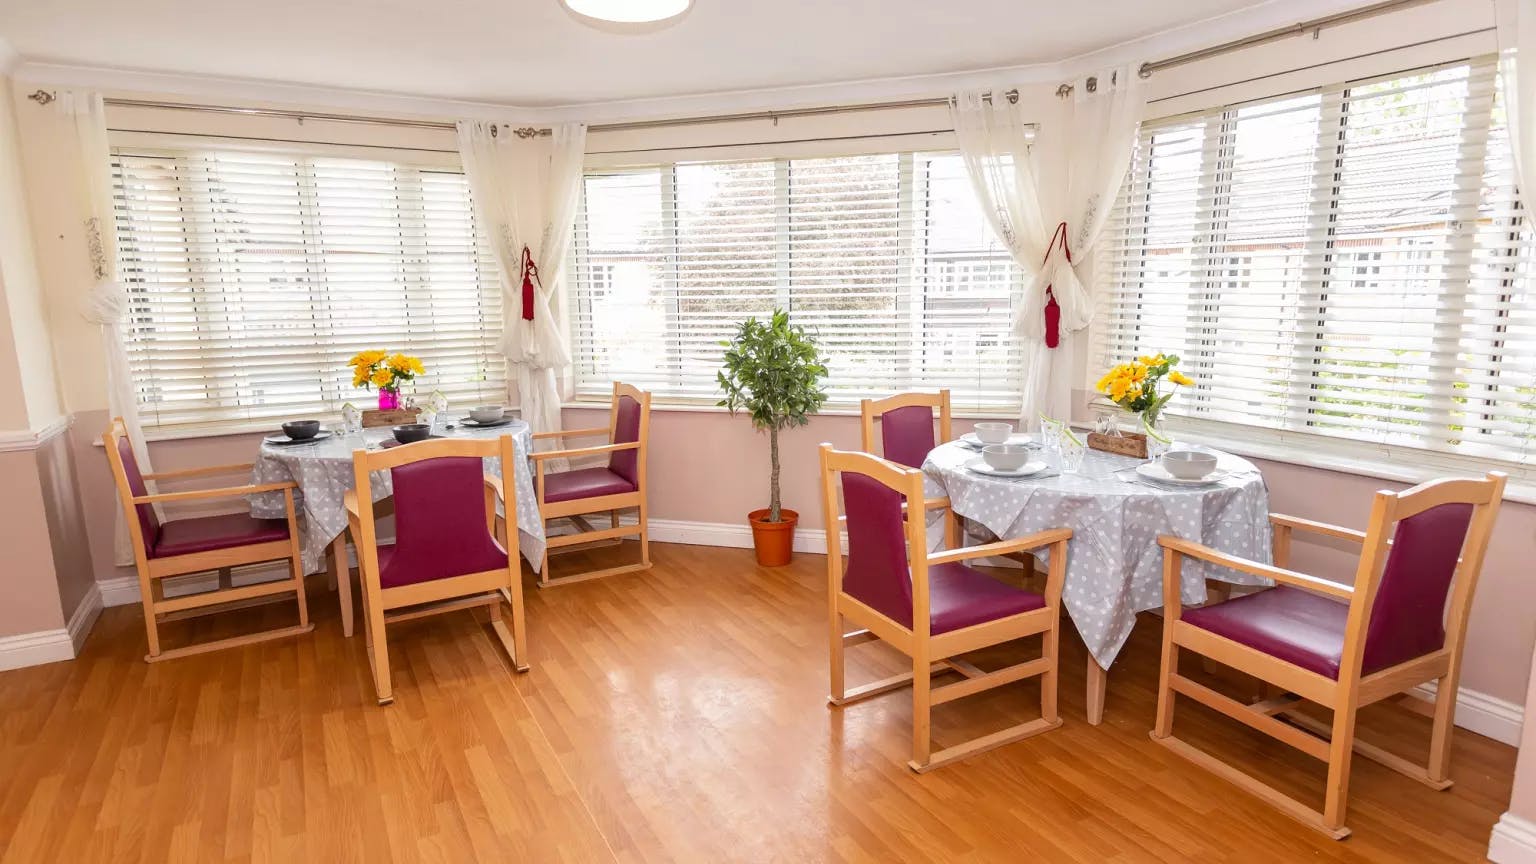 Dining room of Fosse House care home in St Albans, Hertfordshire